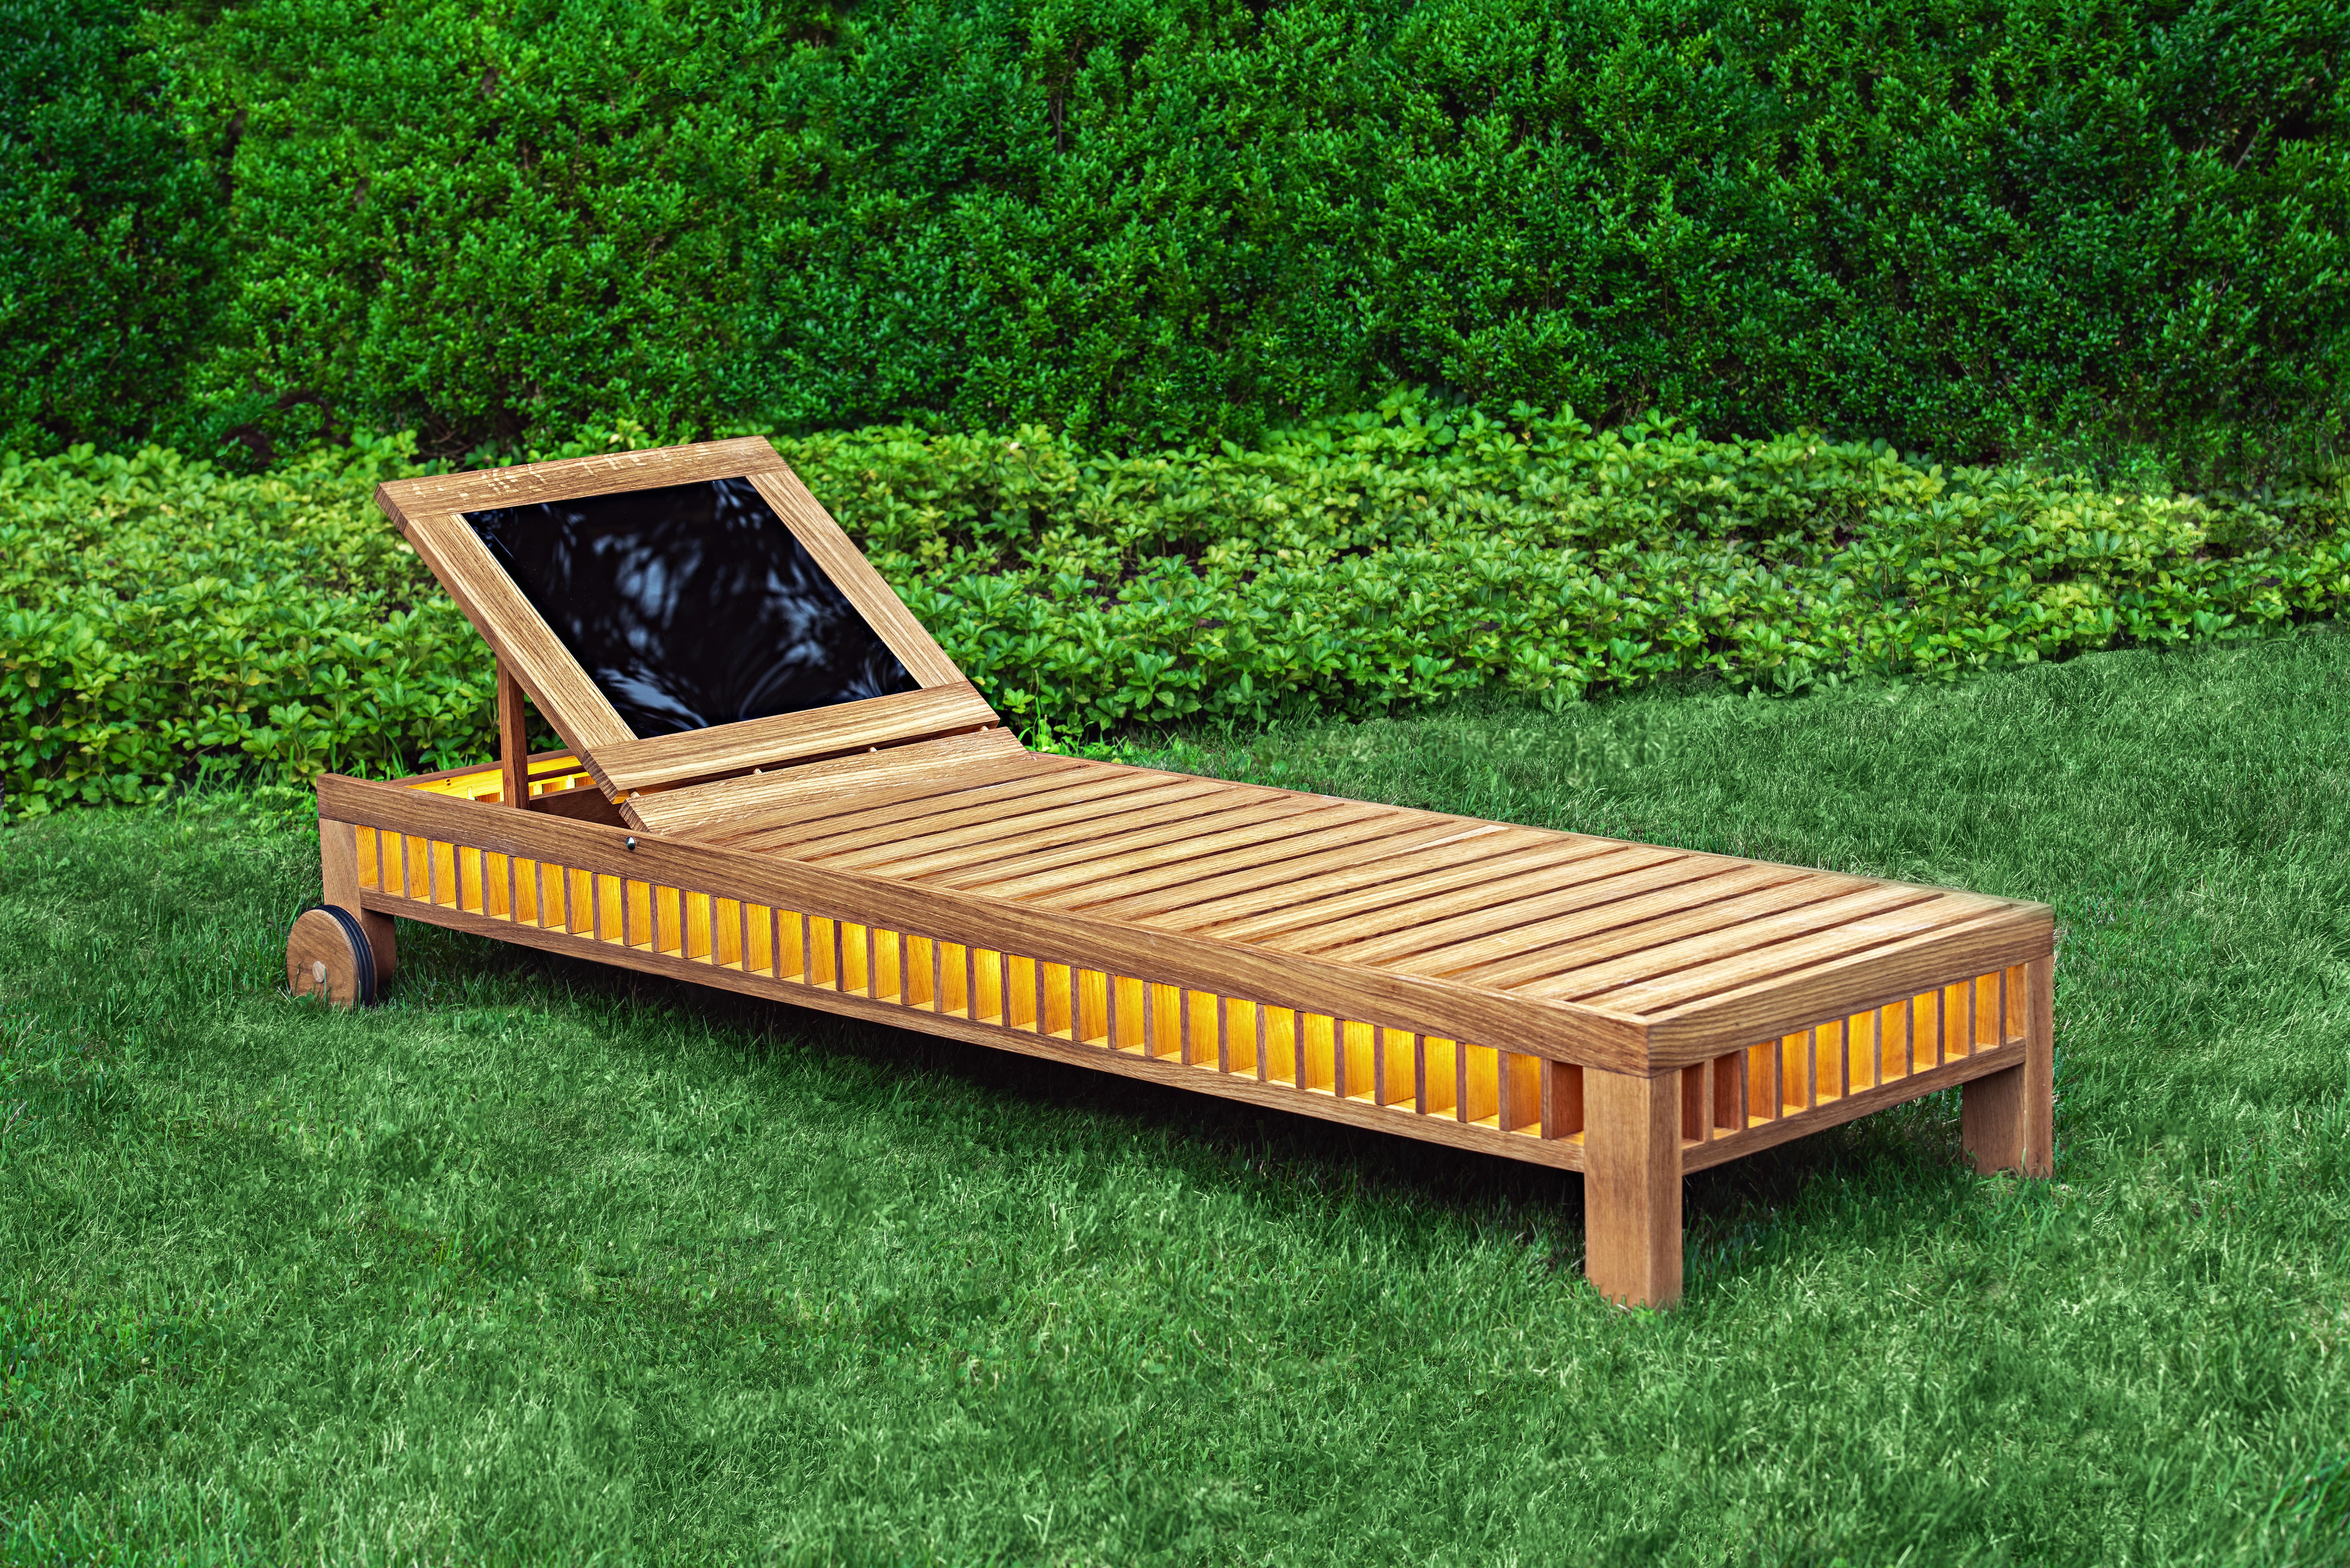 This wooden slatted solar lounger integrates a photovoltaic panel in its adjustable backrest. The panel, which reflects the surroundings in its mirrored surface, collects enough power to illuminate lights inside the body of the lounger at fall of